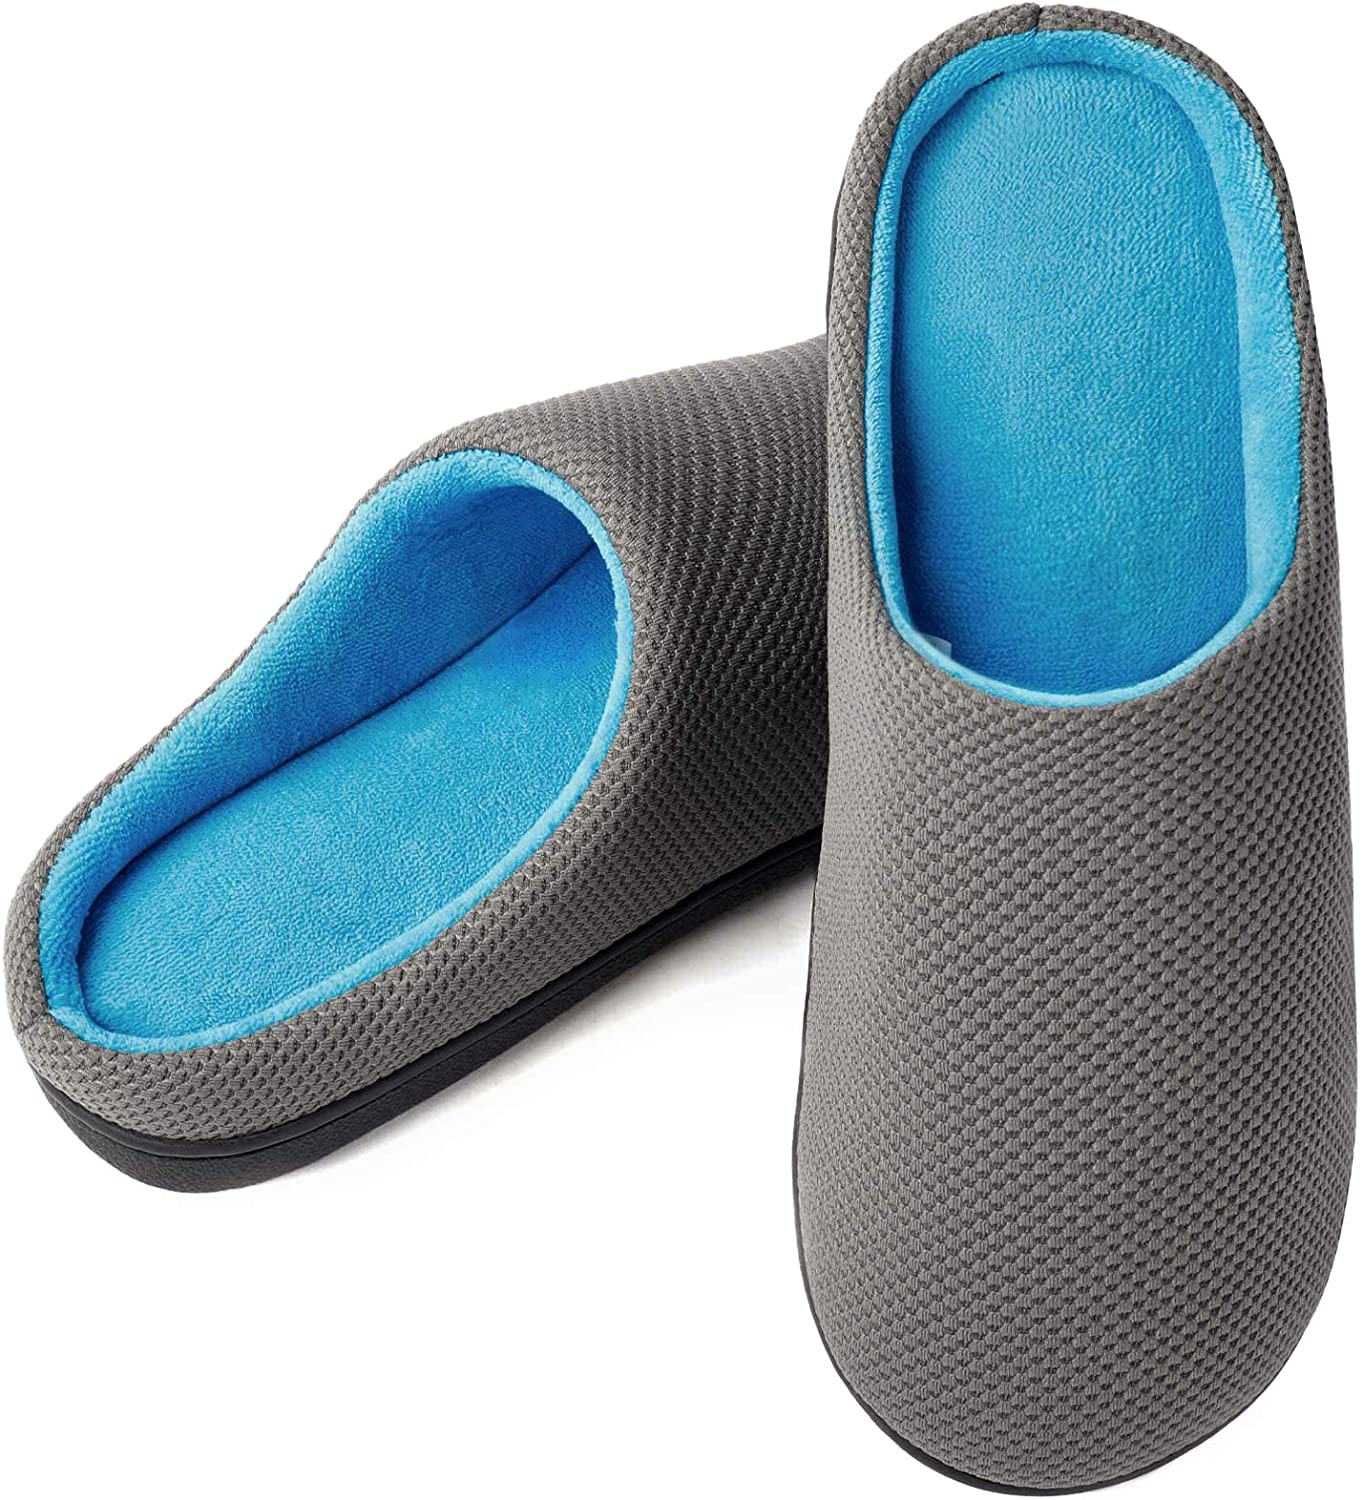 Wishcotton Mens Classic Two-Tone Slippers Comfy Memory Foam House Shoes